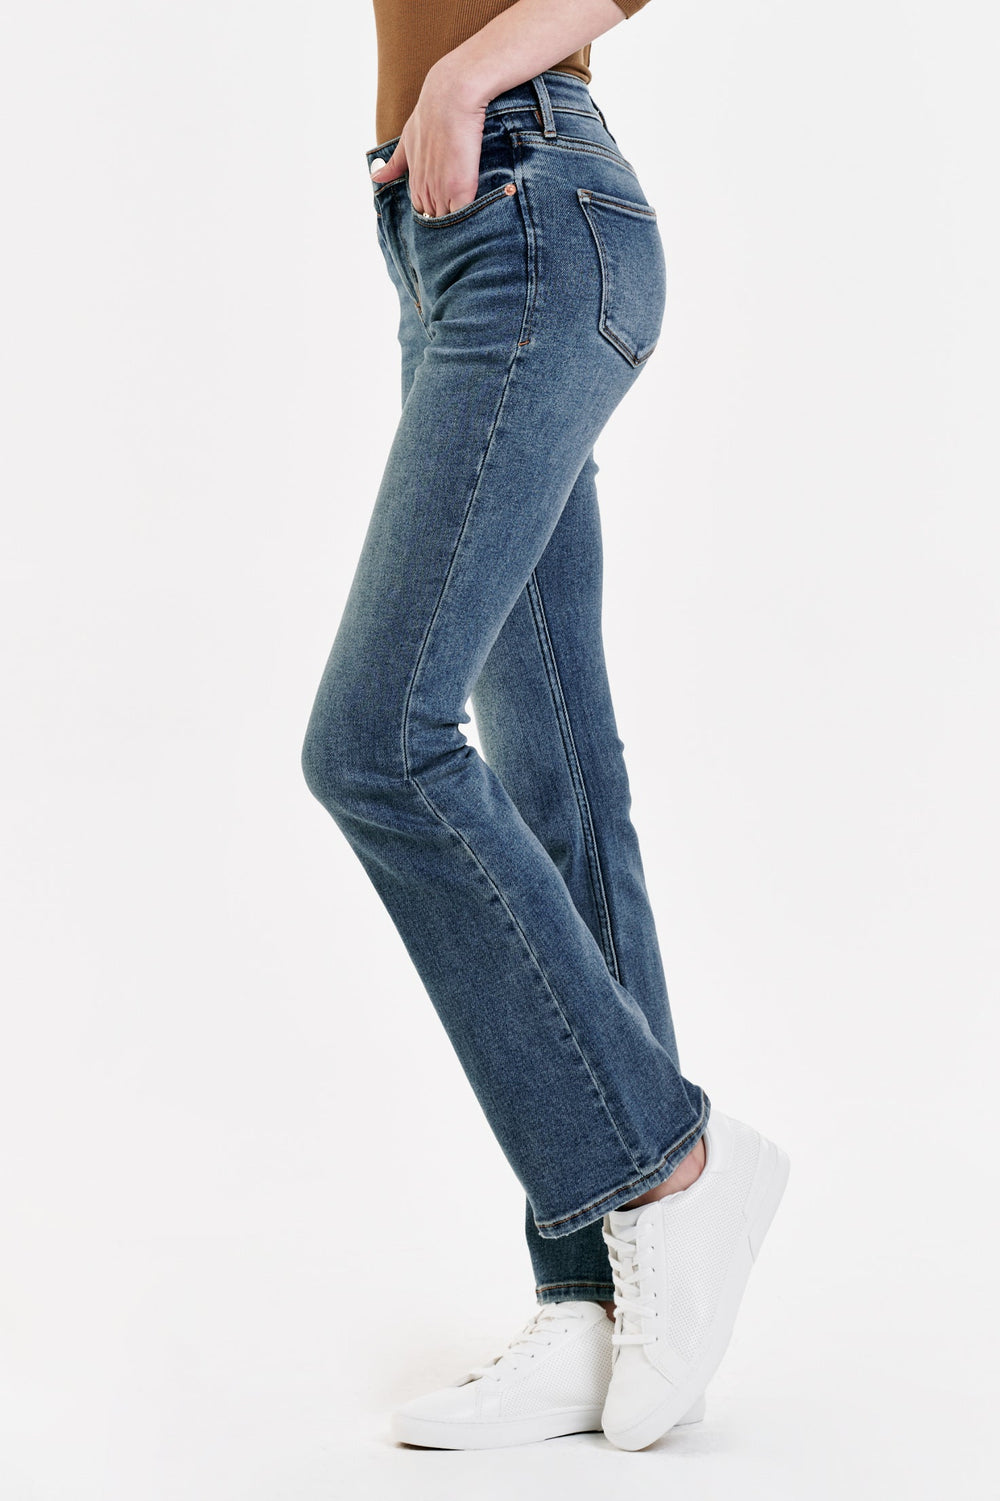 image of a female model wearing a JAXTYN HIGH RISE BOOTCUT JEANS SILVERDALE JEANS